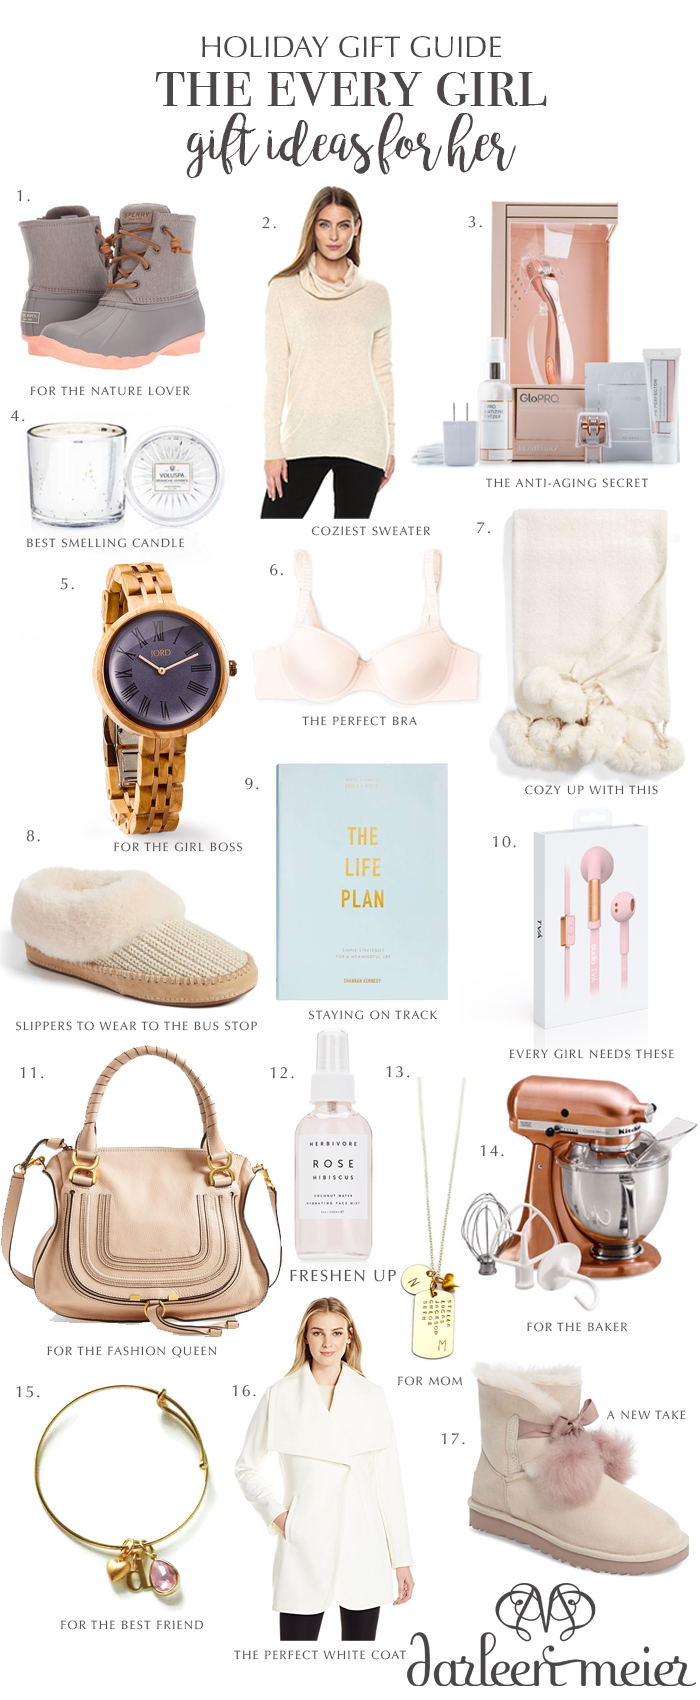 holiday gift guide 2017 for her, holiday gift ideas for the every girl, holiday for for nature lovers, for the bake, girl boss, fashion queen, fashion lover, holiday gift guide for mom, wire less headphones, sudio wireless, jord watches for women, girl gift guides, Christmas present ideas, glo pro anti aging 